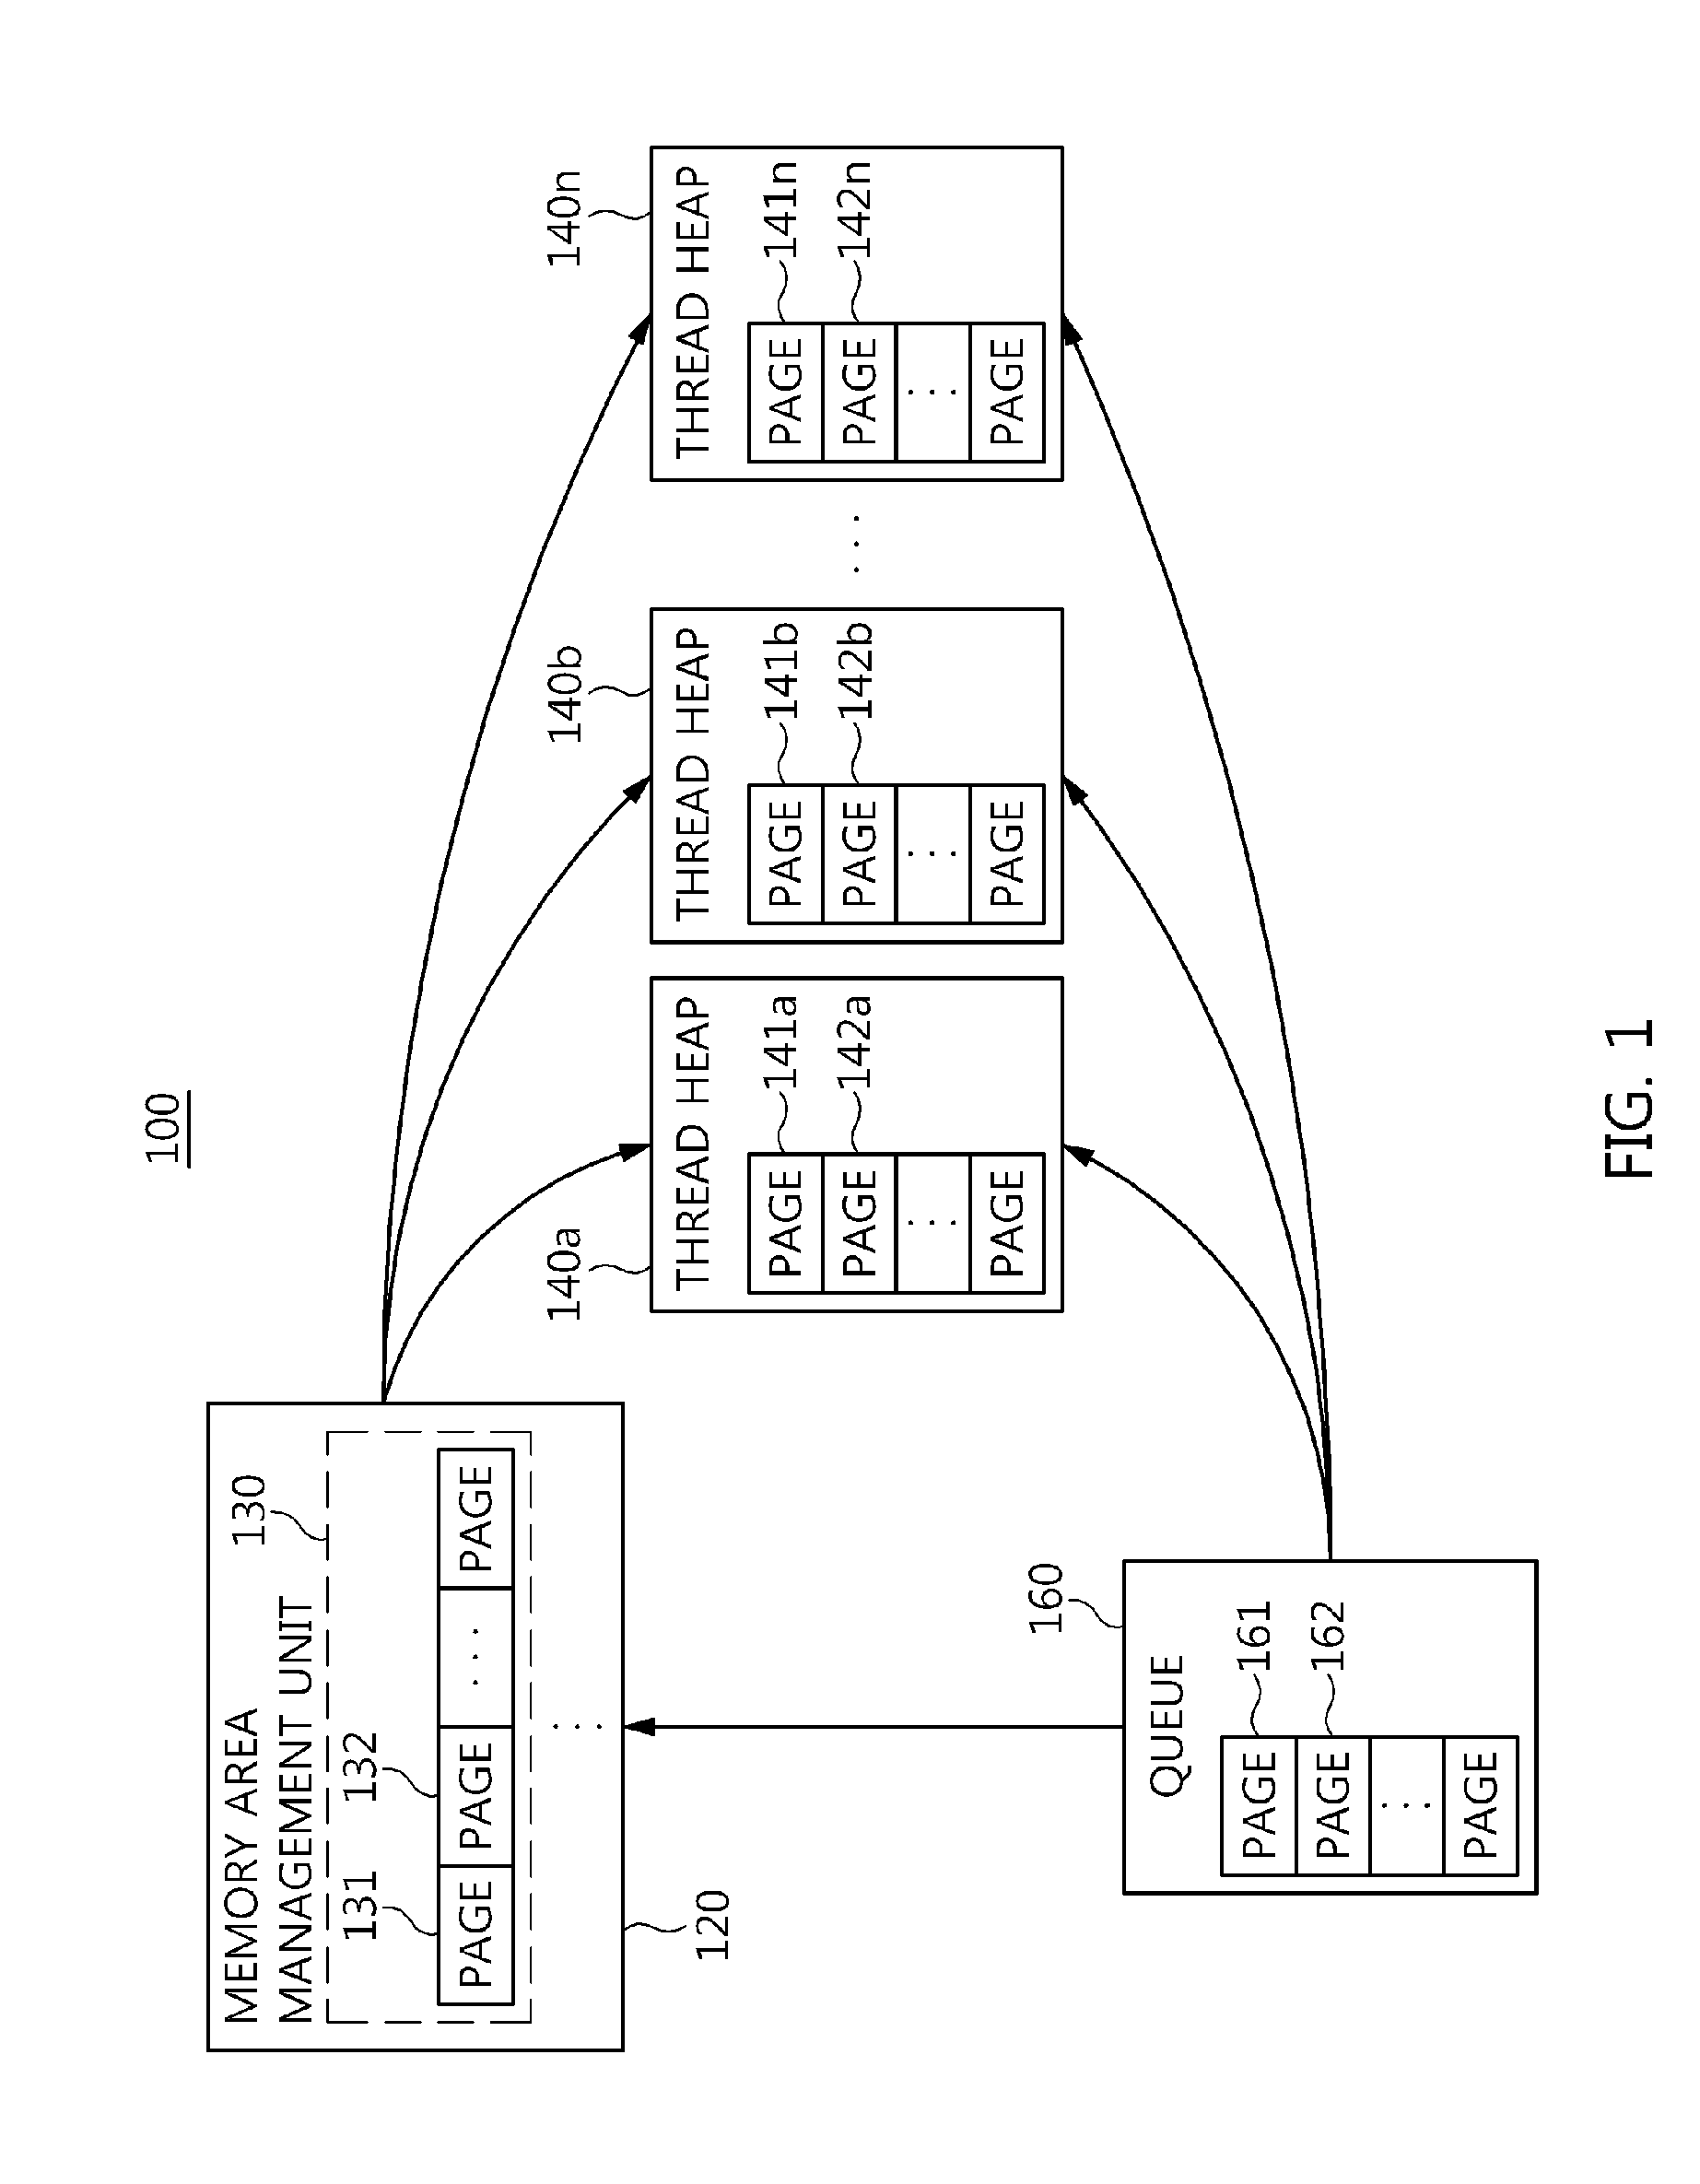 Memory management apparatus and method for threads of data distribution service middleware